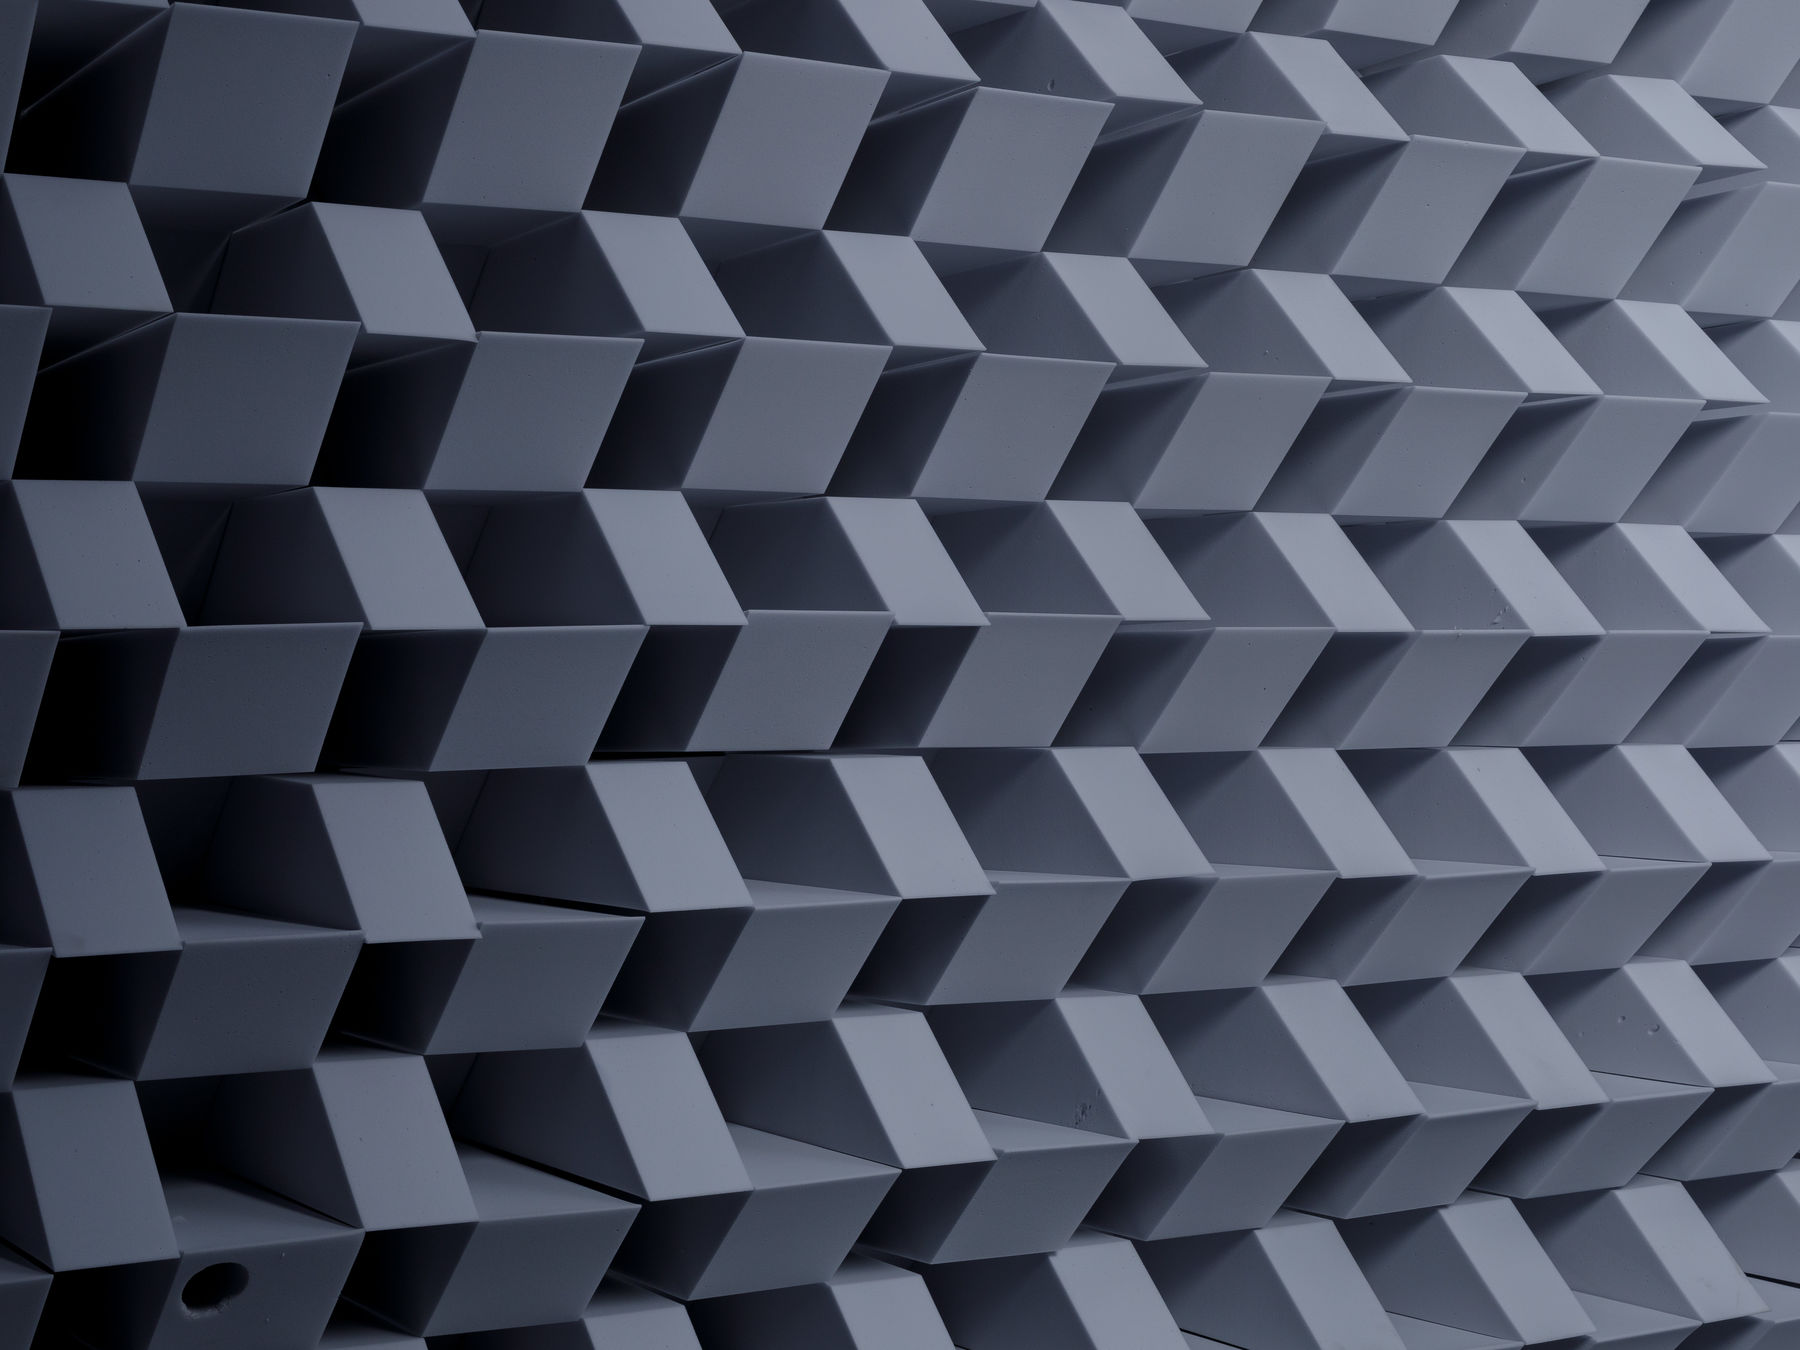 The full frame shows the surface of a soundproofing wall in an anechoic chamber. Gray pyramids of foam cover the surface creating a geometric pattern. The flash from the camera renders high contrast between the shapes, starting darker in the image background and gradually lightening as it comes to the foreground.